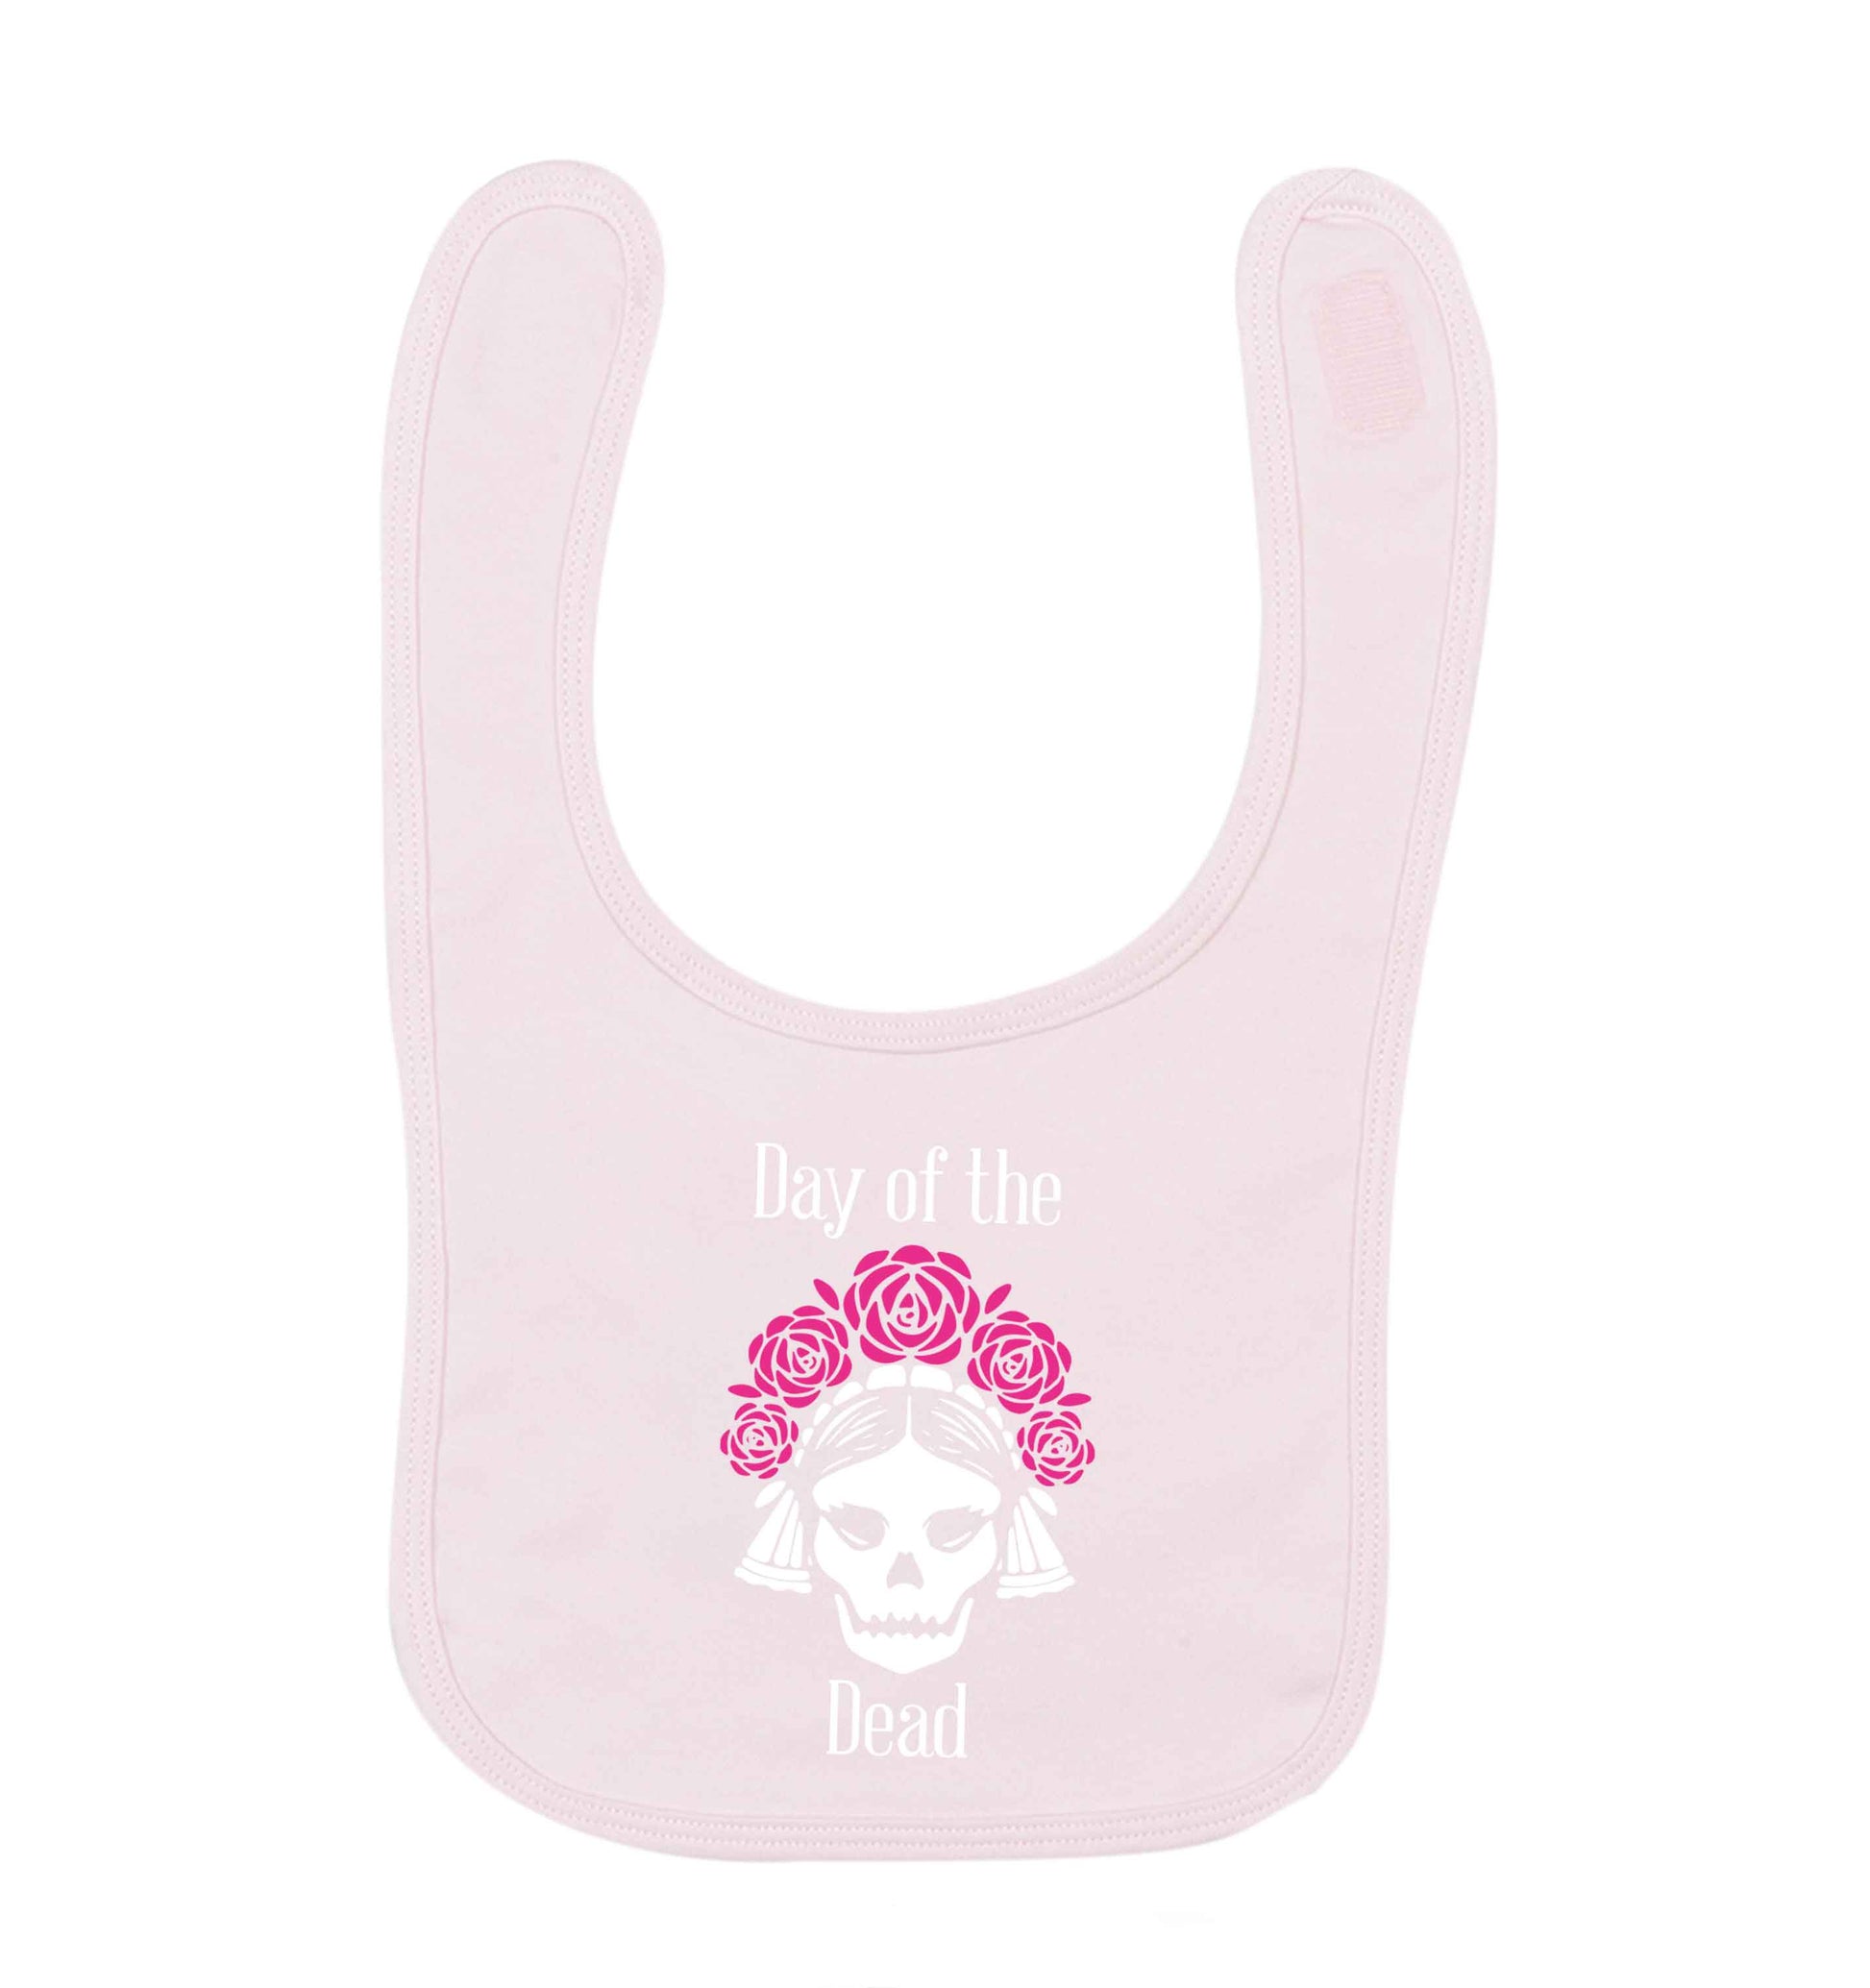 Day of the dead pale pink baby bib